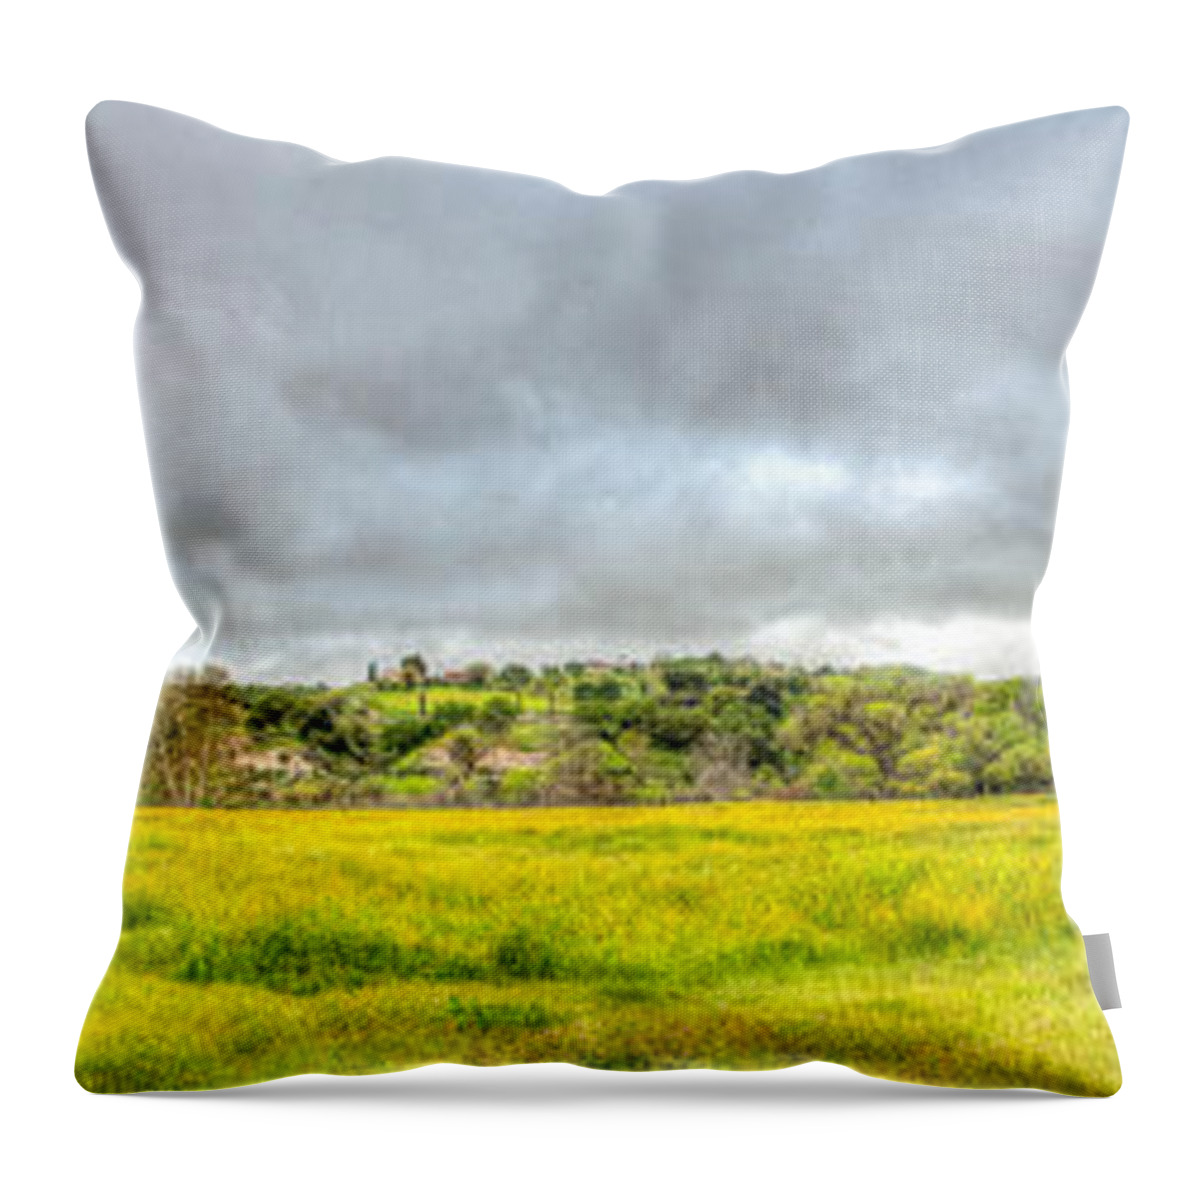 2016conniecooper-edwards Throw Pillow featuring the photograph Panorama View Spring Time by Connie Cooper-Edwards